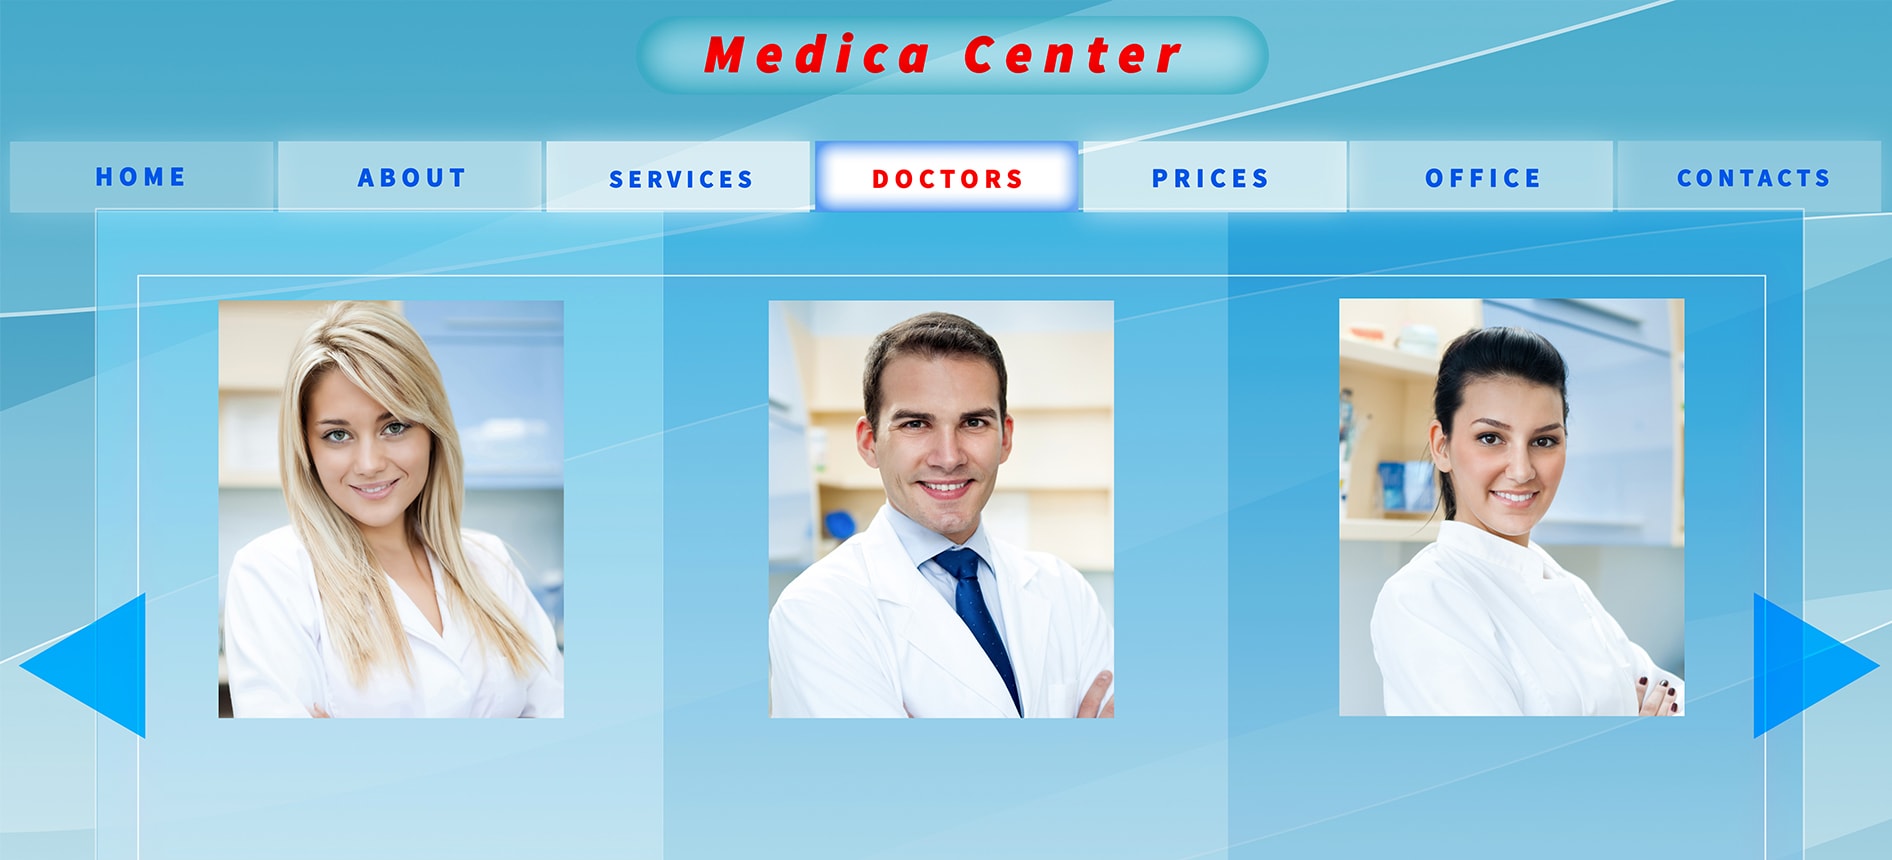 5 Tips to Boost Your Medical Practice Marketing image